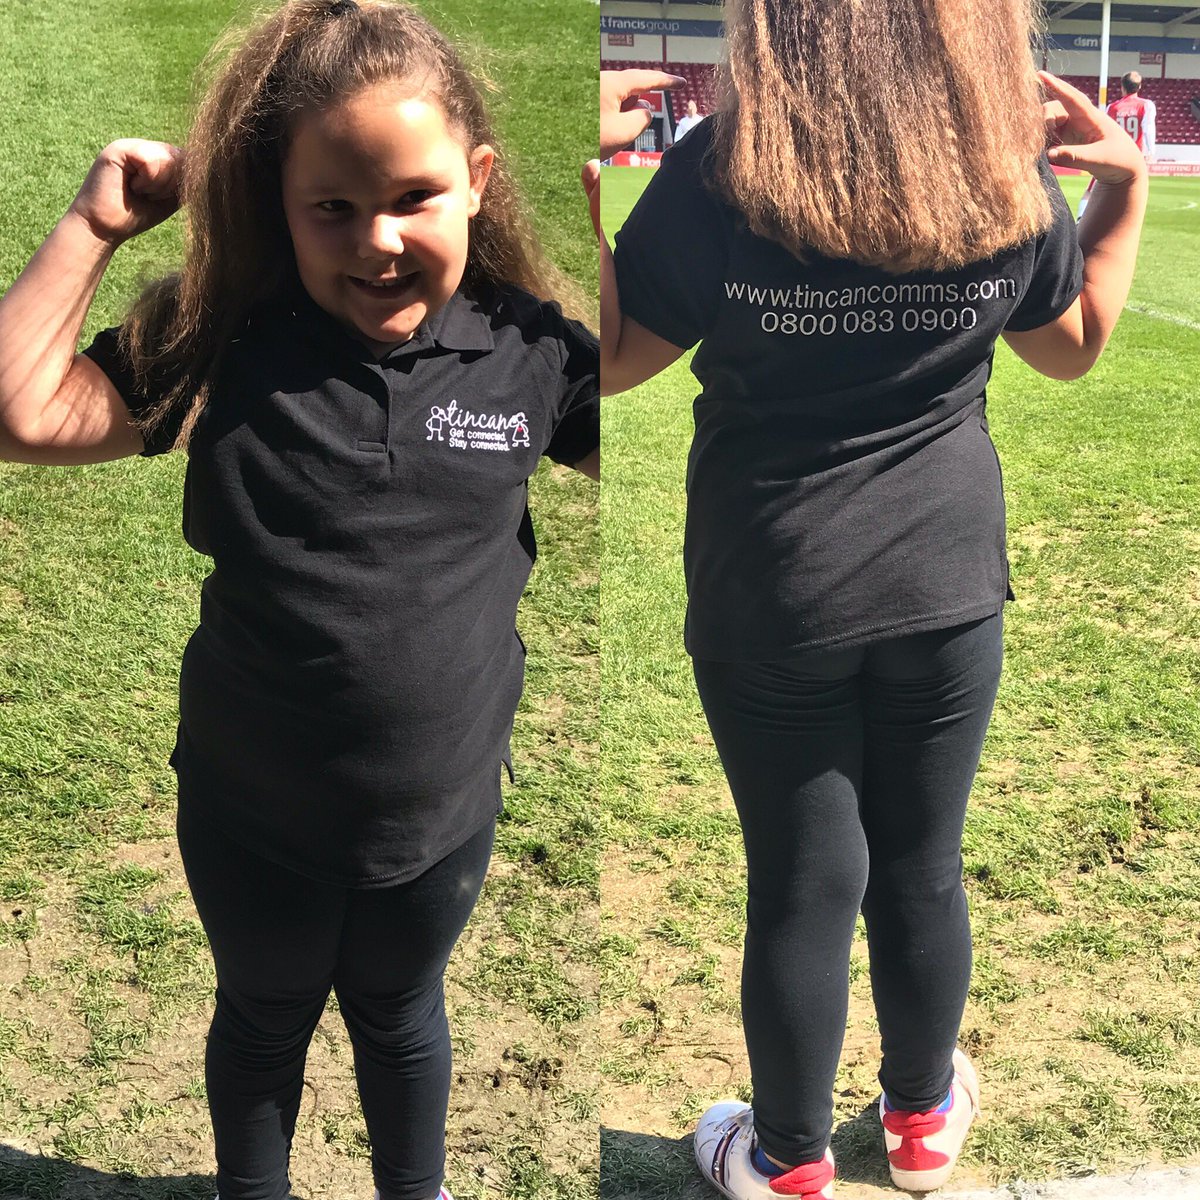 #teamtincan youngest member this made her day thanks  @MAA_Charity mascot  #maacmatch #celebrityfootball @Sellebrity_UK @WFCOfficial